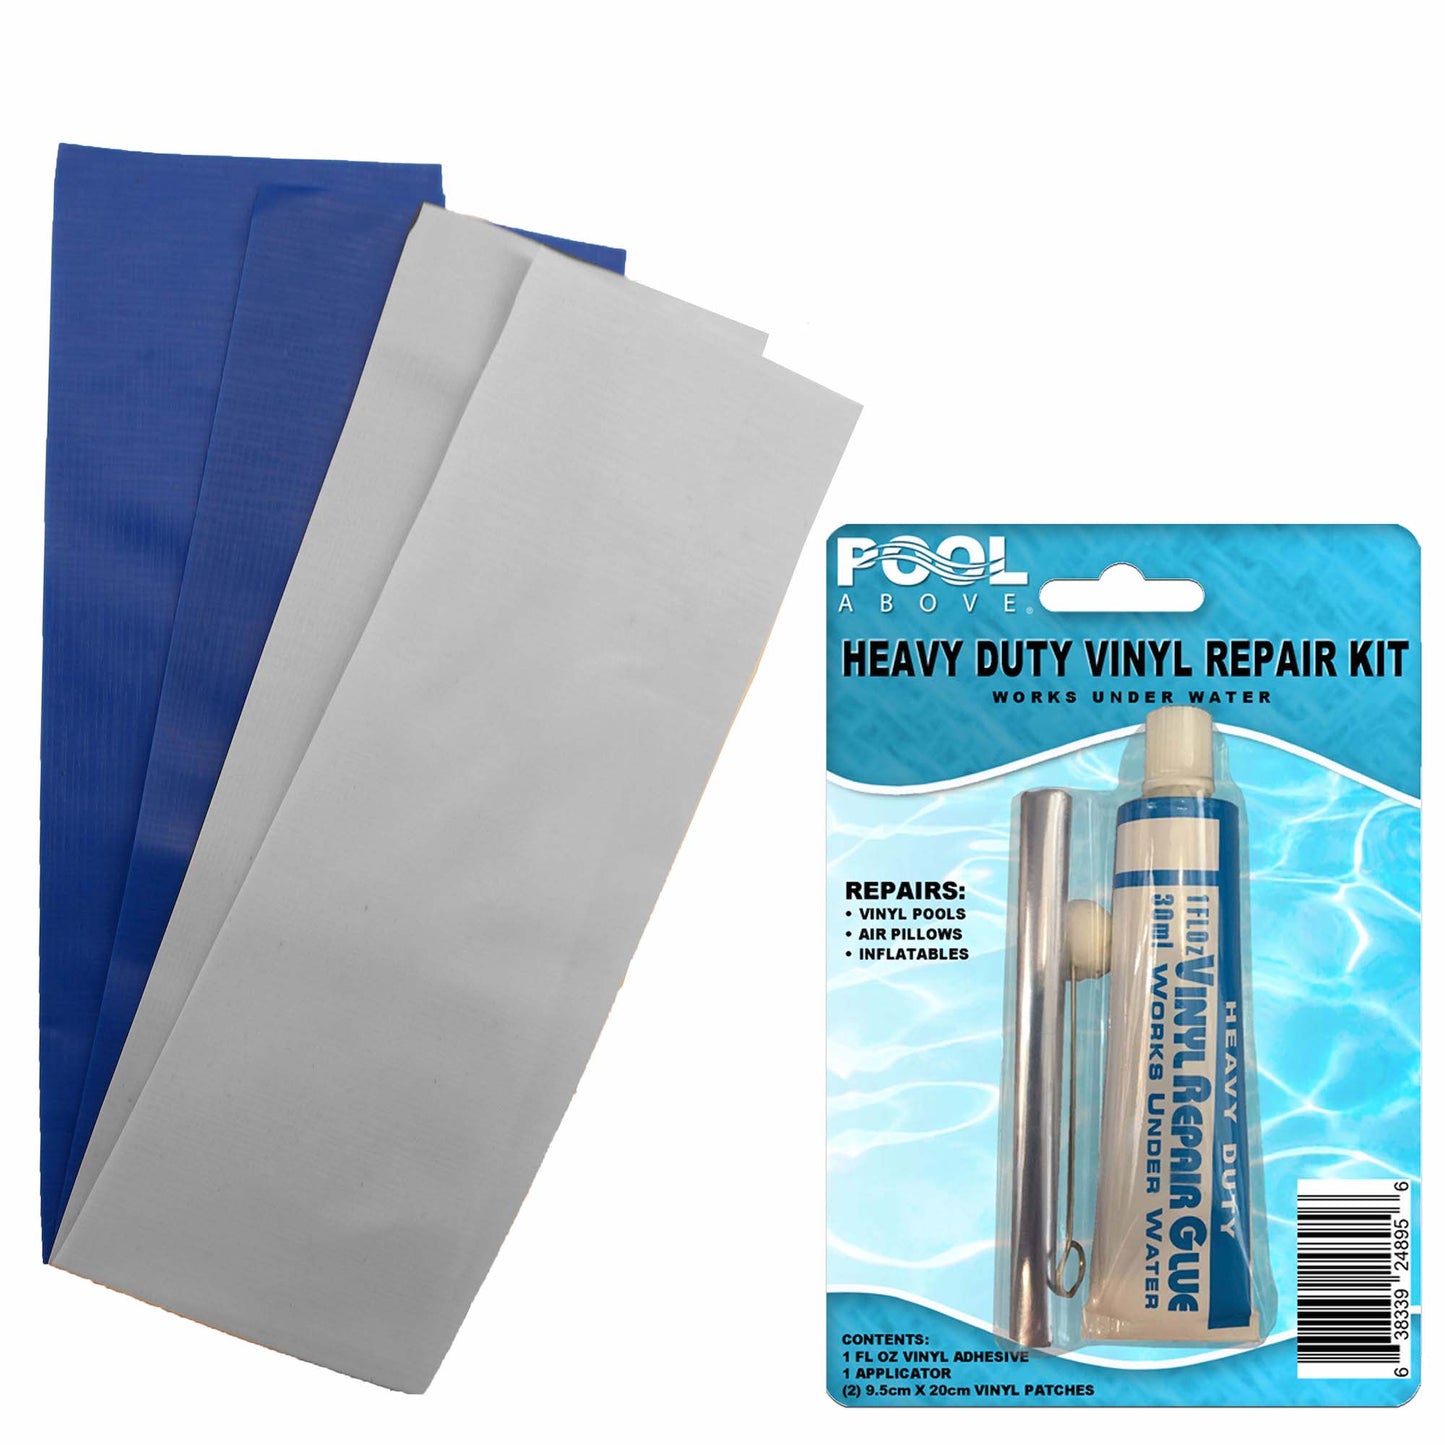 Repair Kit for Vinyl Pools | Vinyl glue | Blue and White Patches